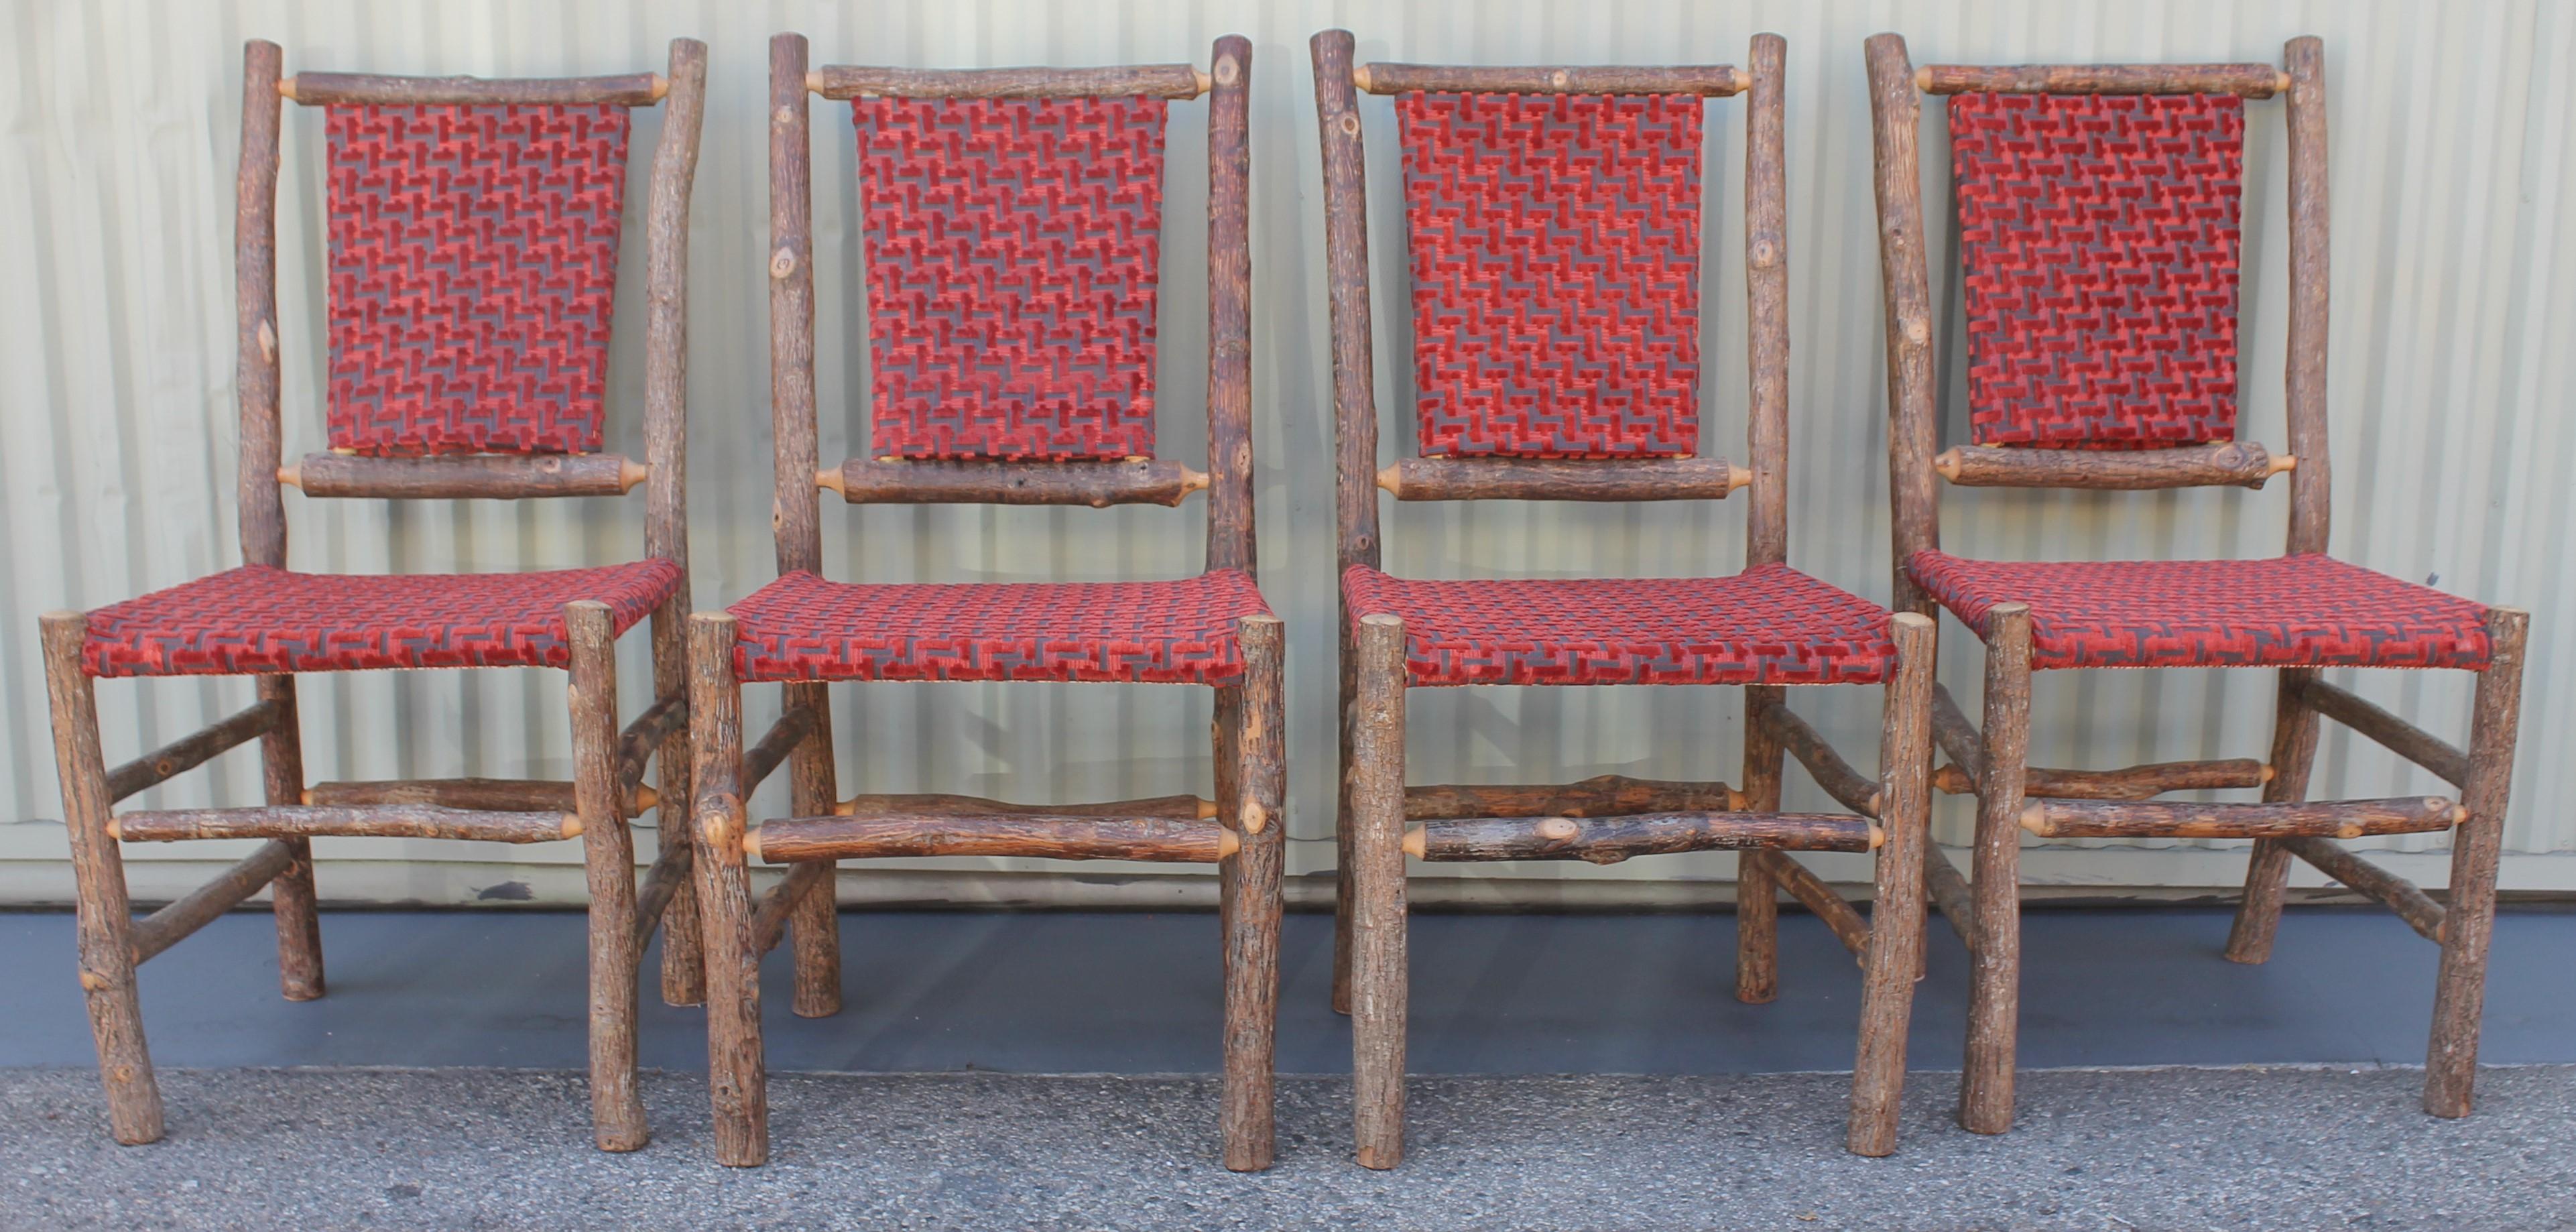 Hand-Crafted Old Hickory Chairs Upholstered Seat and Backs or Set of Four